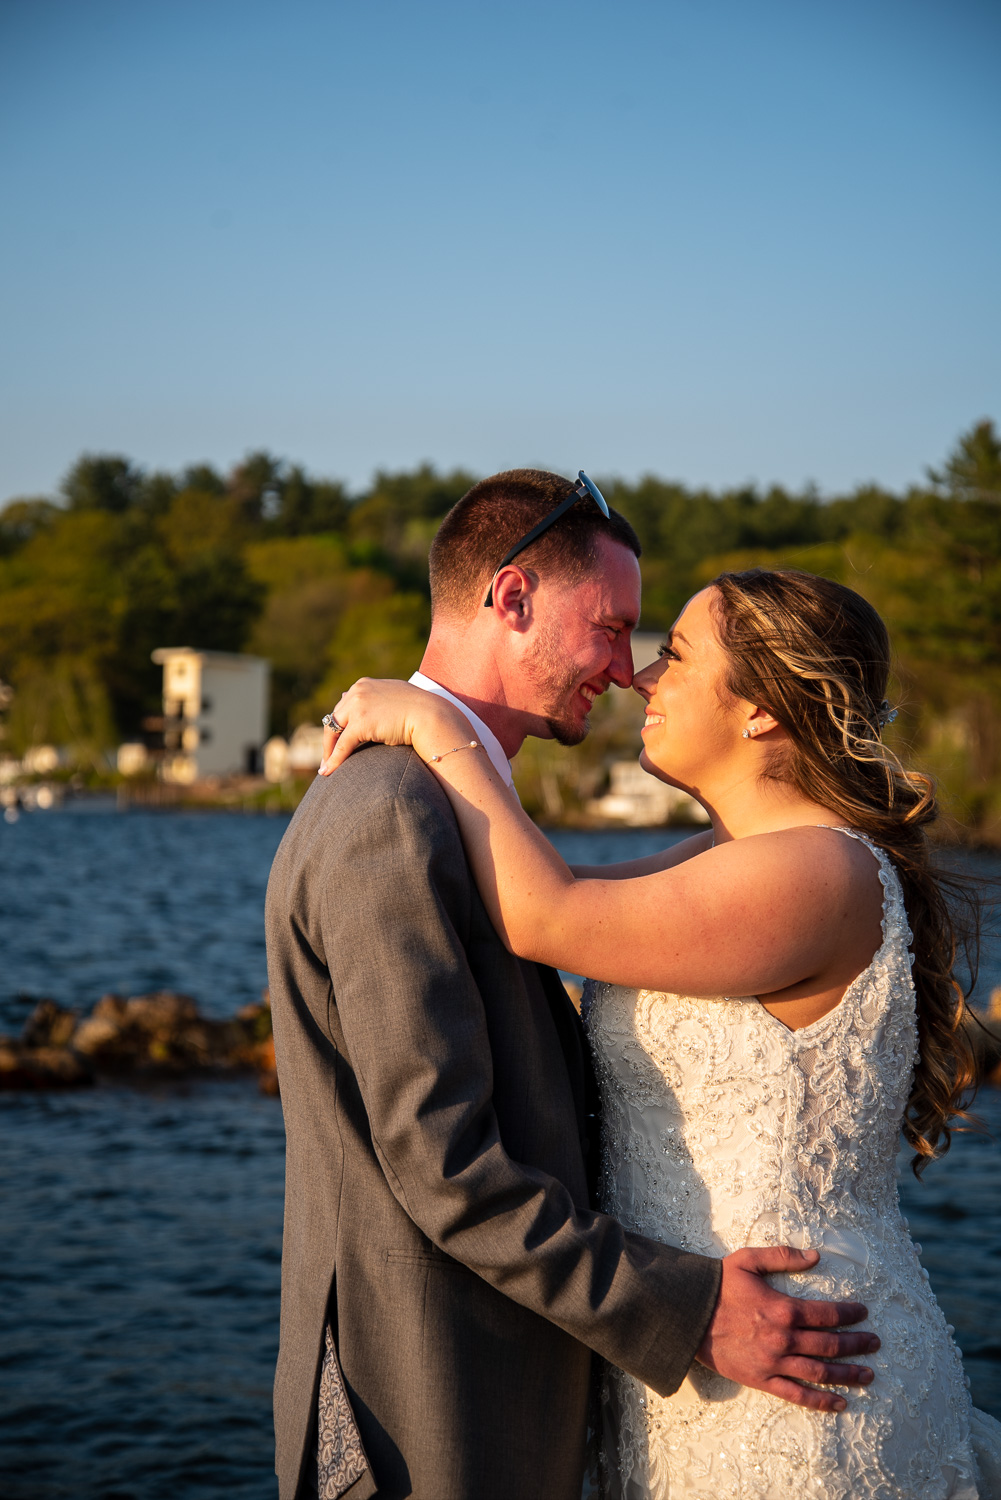 Bride and groom nose to nose smiling on the dock at the lakeside wedding